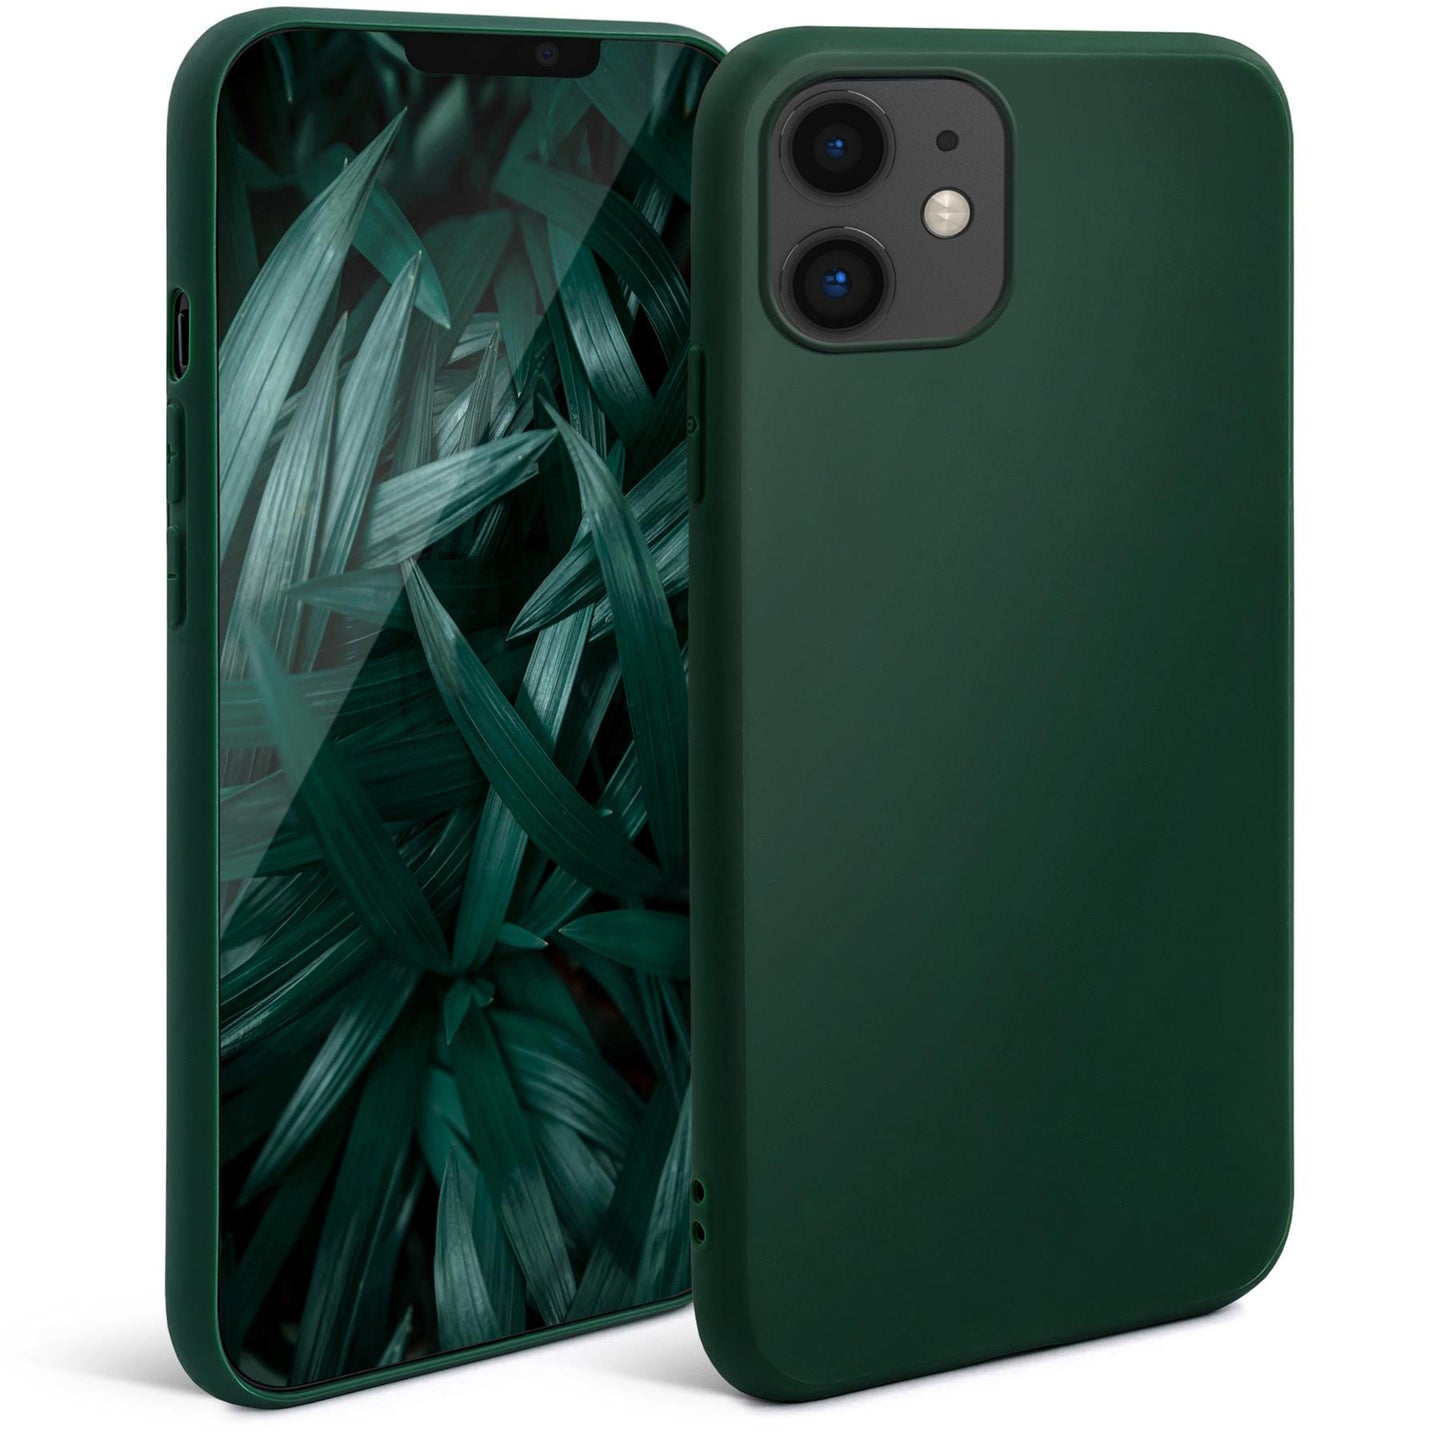 Moozy Minimalist Series Silicone Case for iPhone 11, Midnight Green - Matte Finish Slim Soft TPU Cover